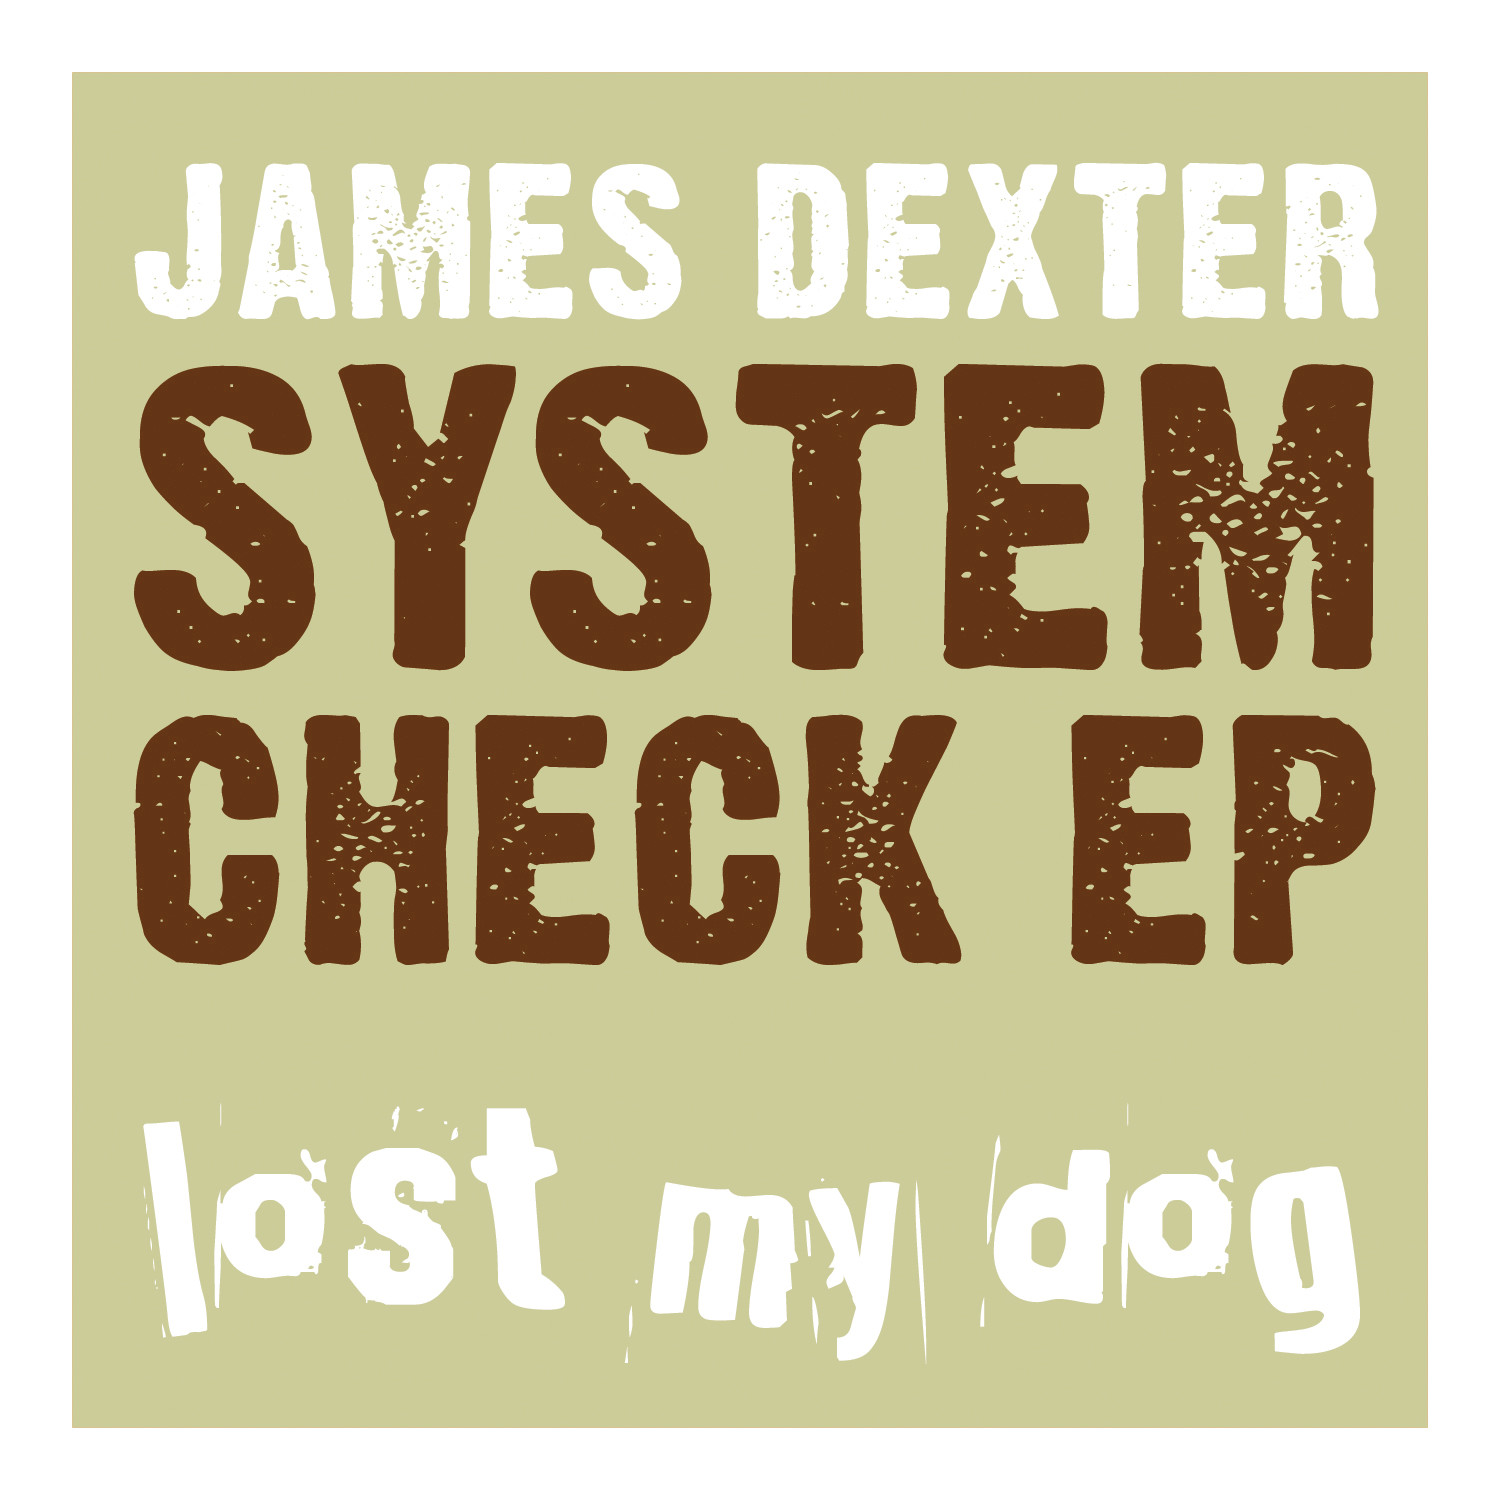 System Check EP